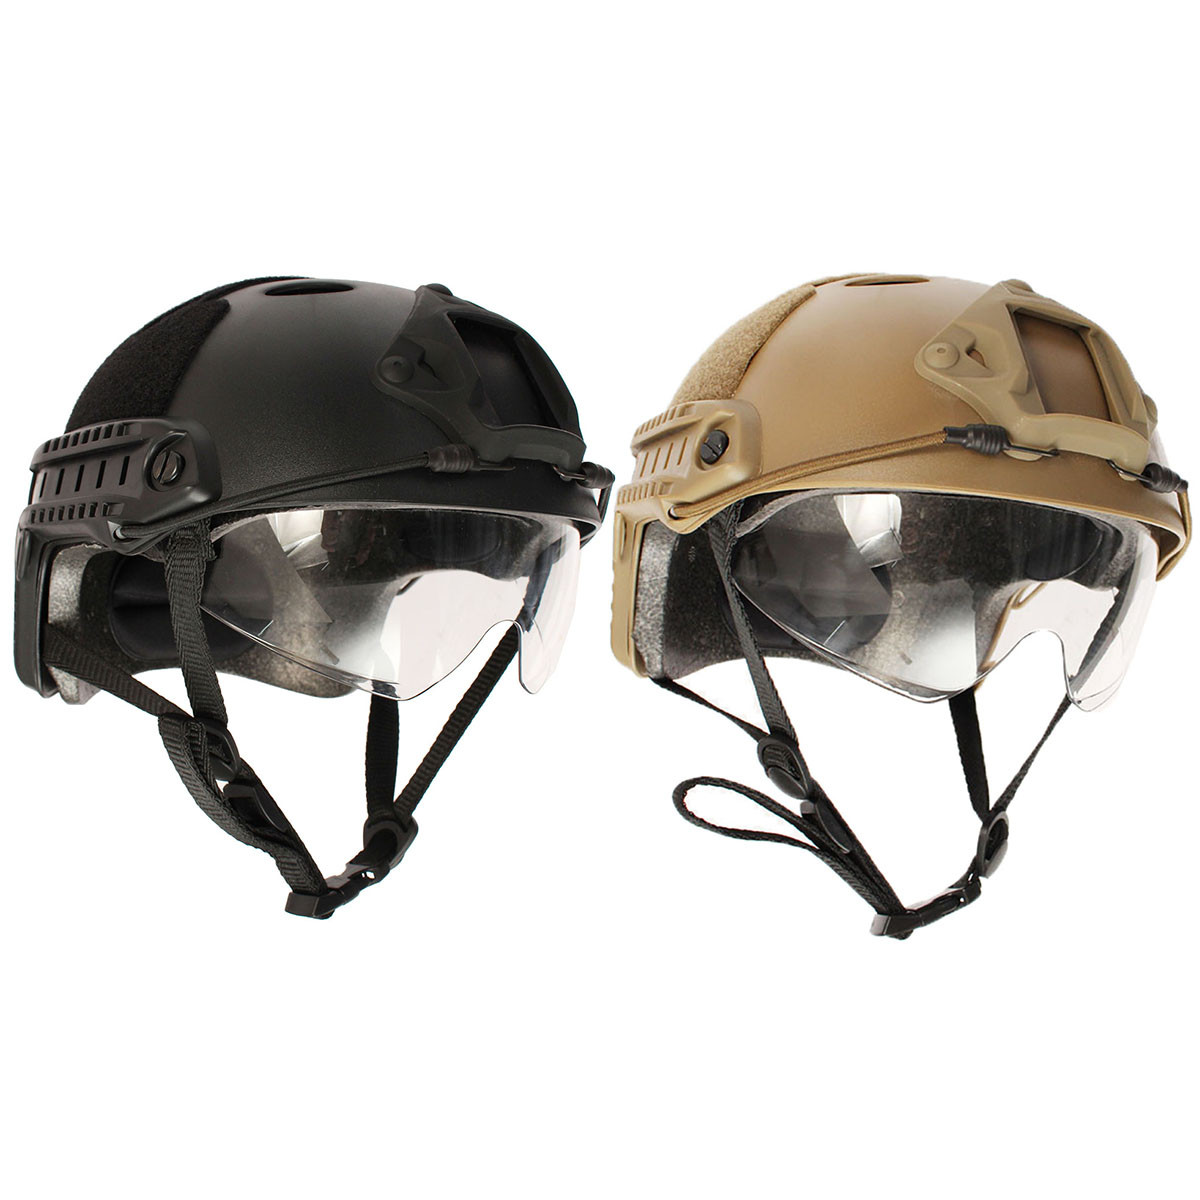 

Tactical Airsoft Paintball SWAT War Game Protective Fast Helmet with Goggle